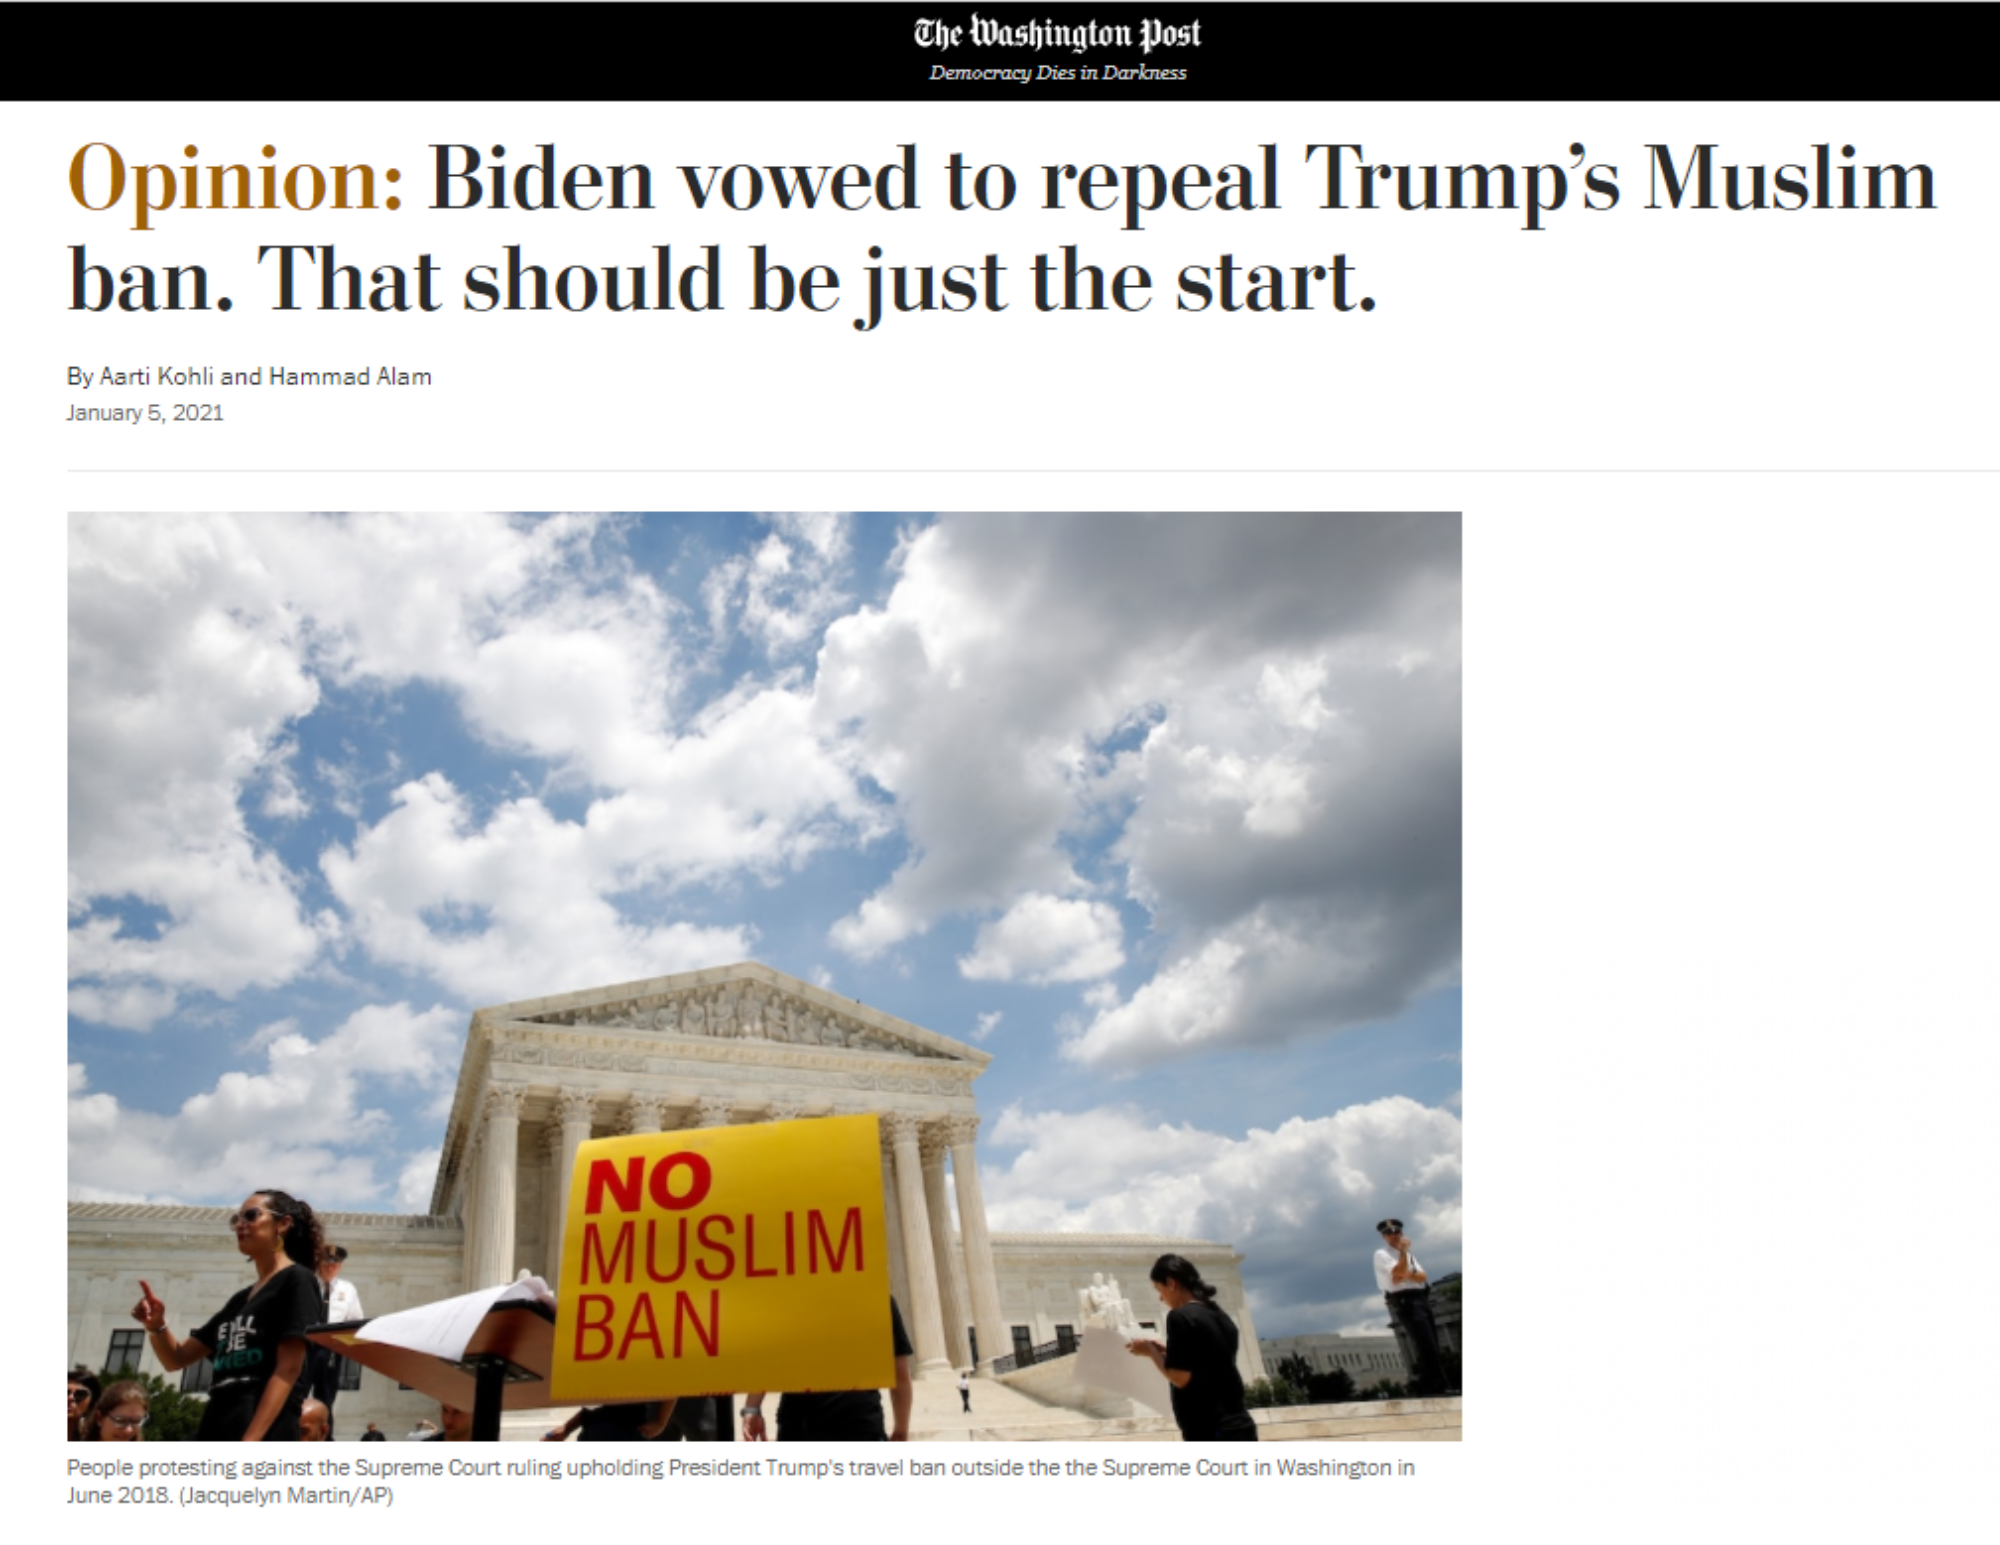 Screenshot of op-ed in the Washington Post. The headline reads "Biden vowed to repeal Trump's Muslim ban. That should be just the start."